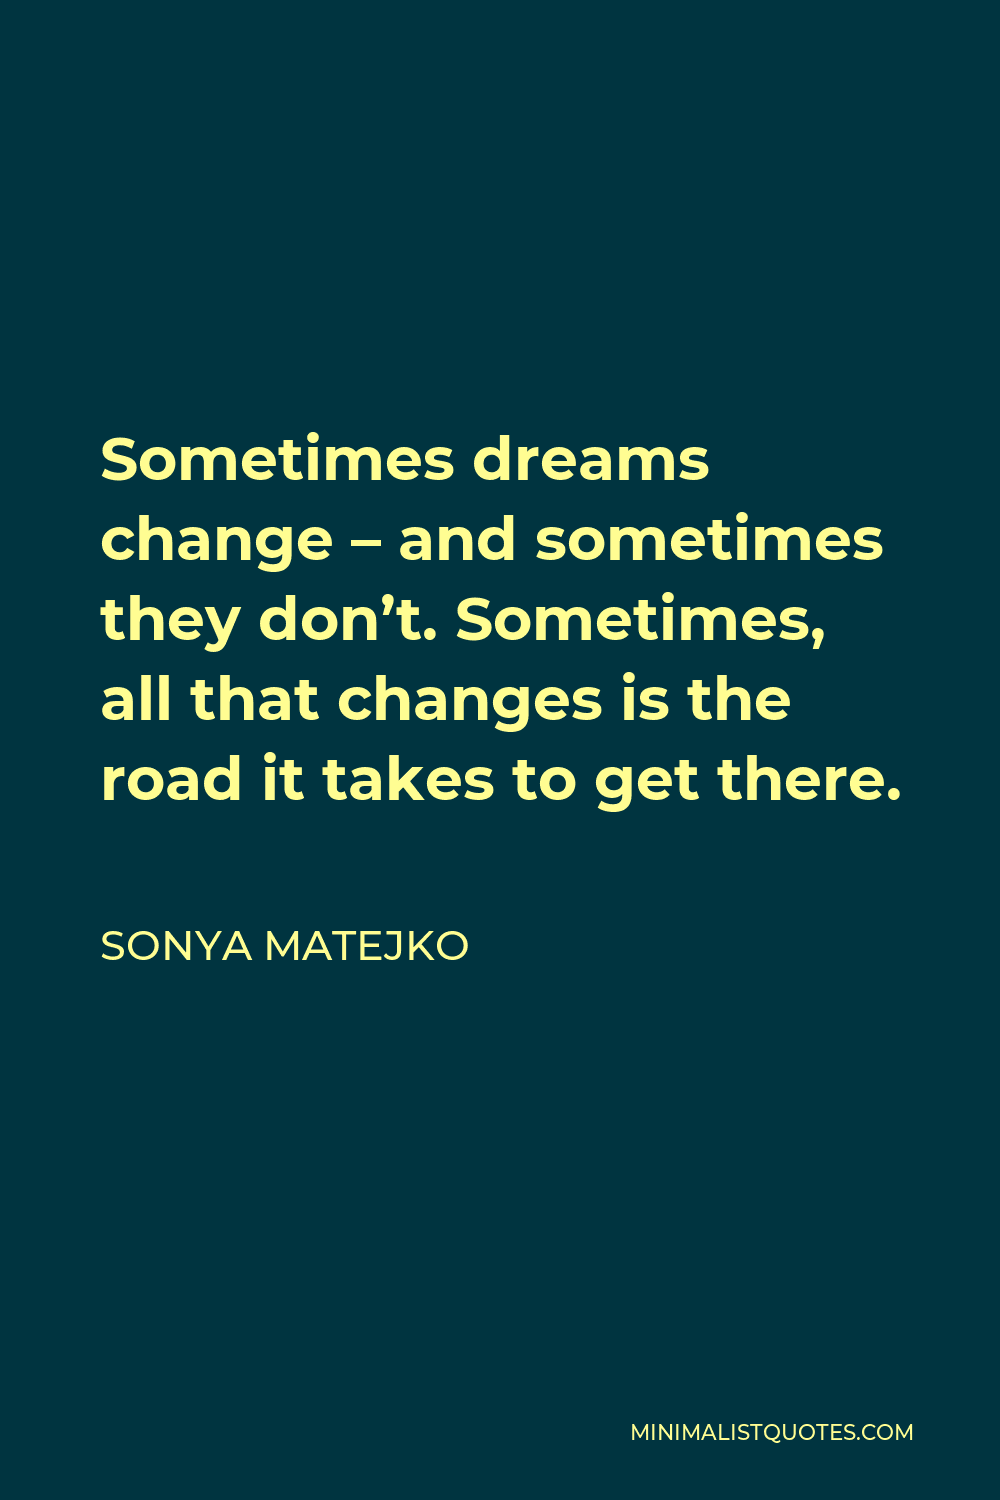 Sonya Matejko Quote - Sometimes dreams change – and sometimes they don’t. Sometimes, all that changes is the road it takes to get there.